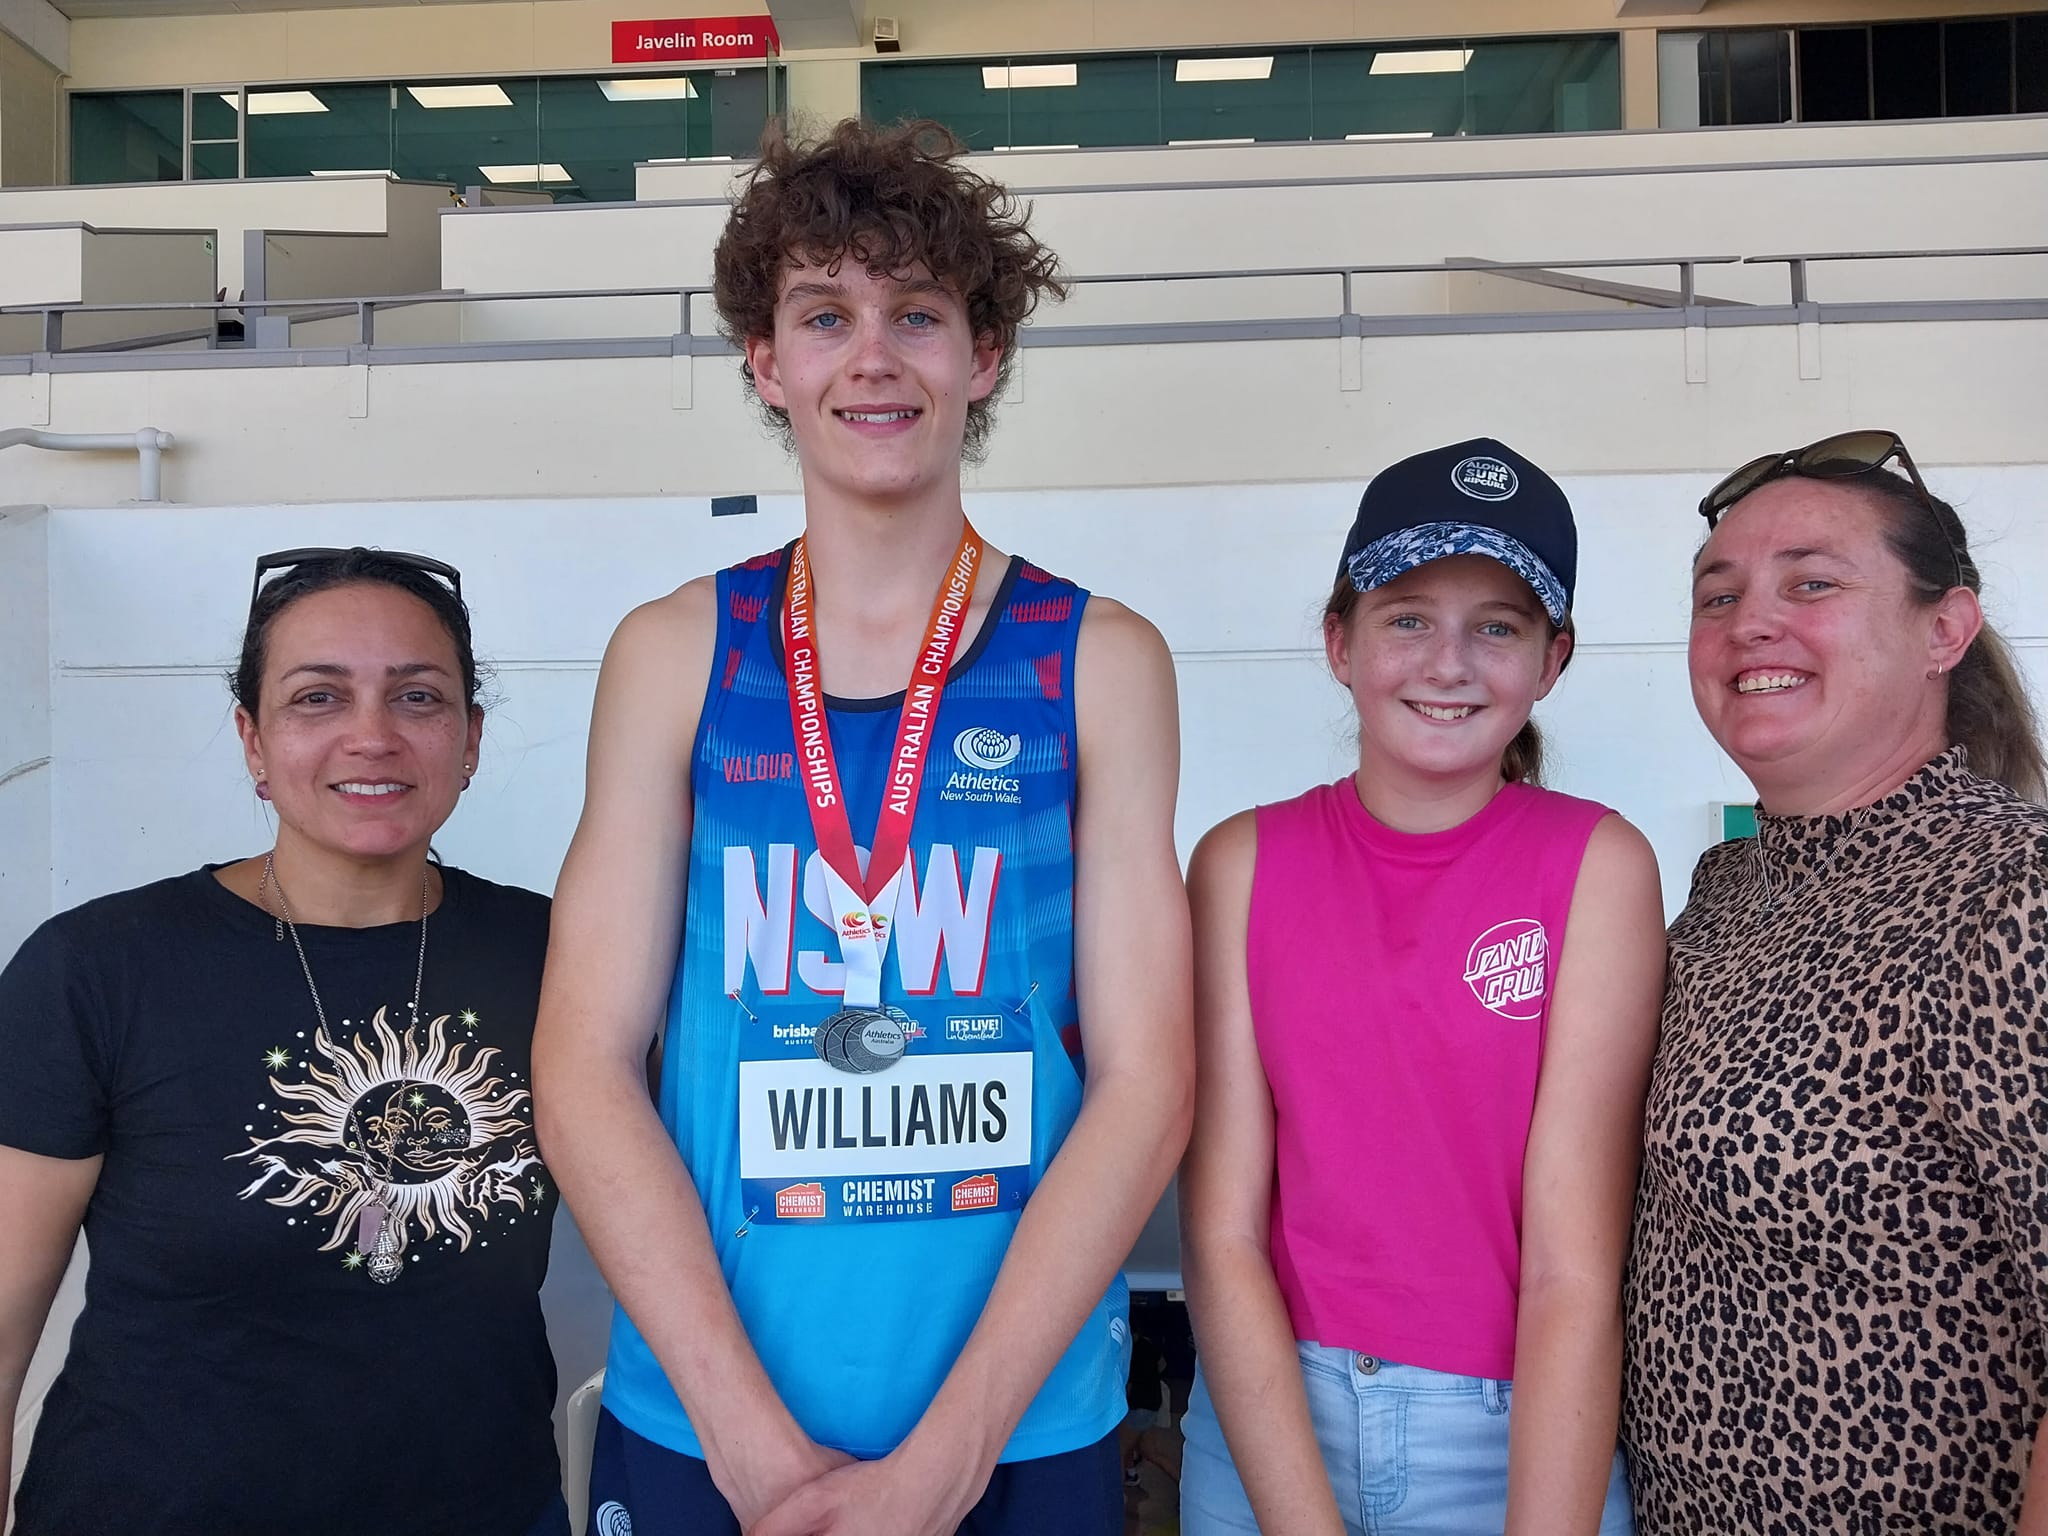 Silver medals for Williams and Hall